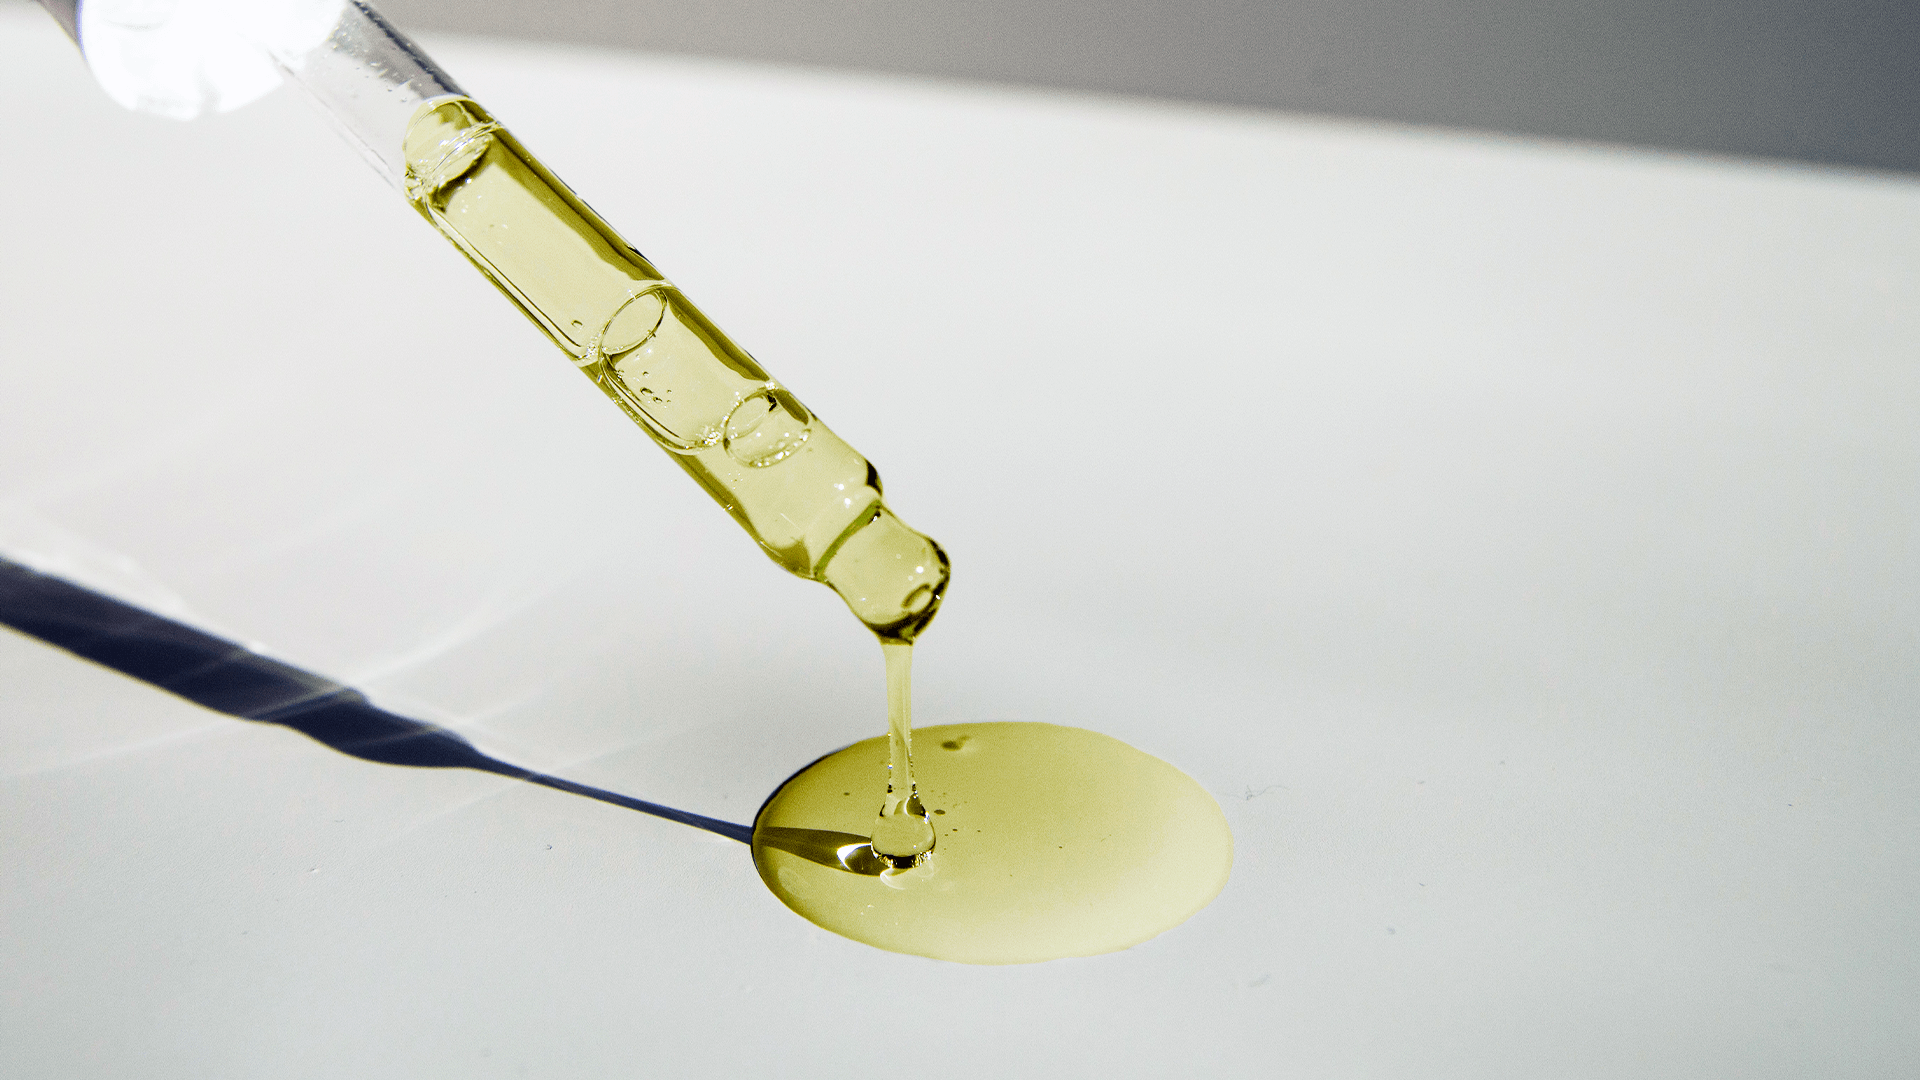 Oil coming from a glass dropper